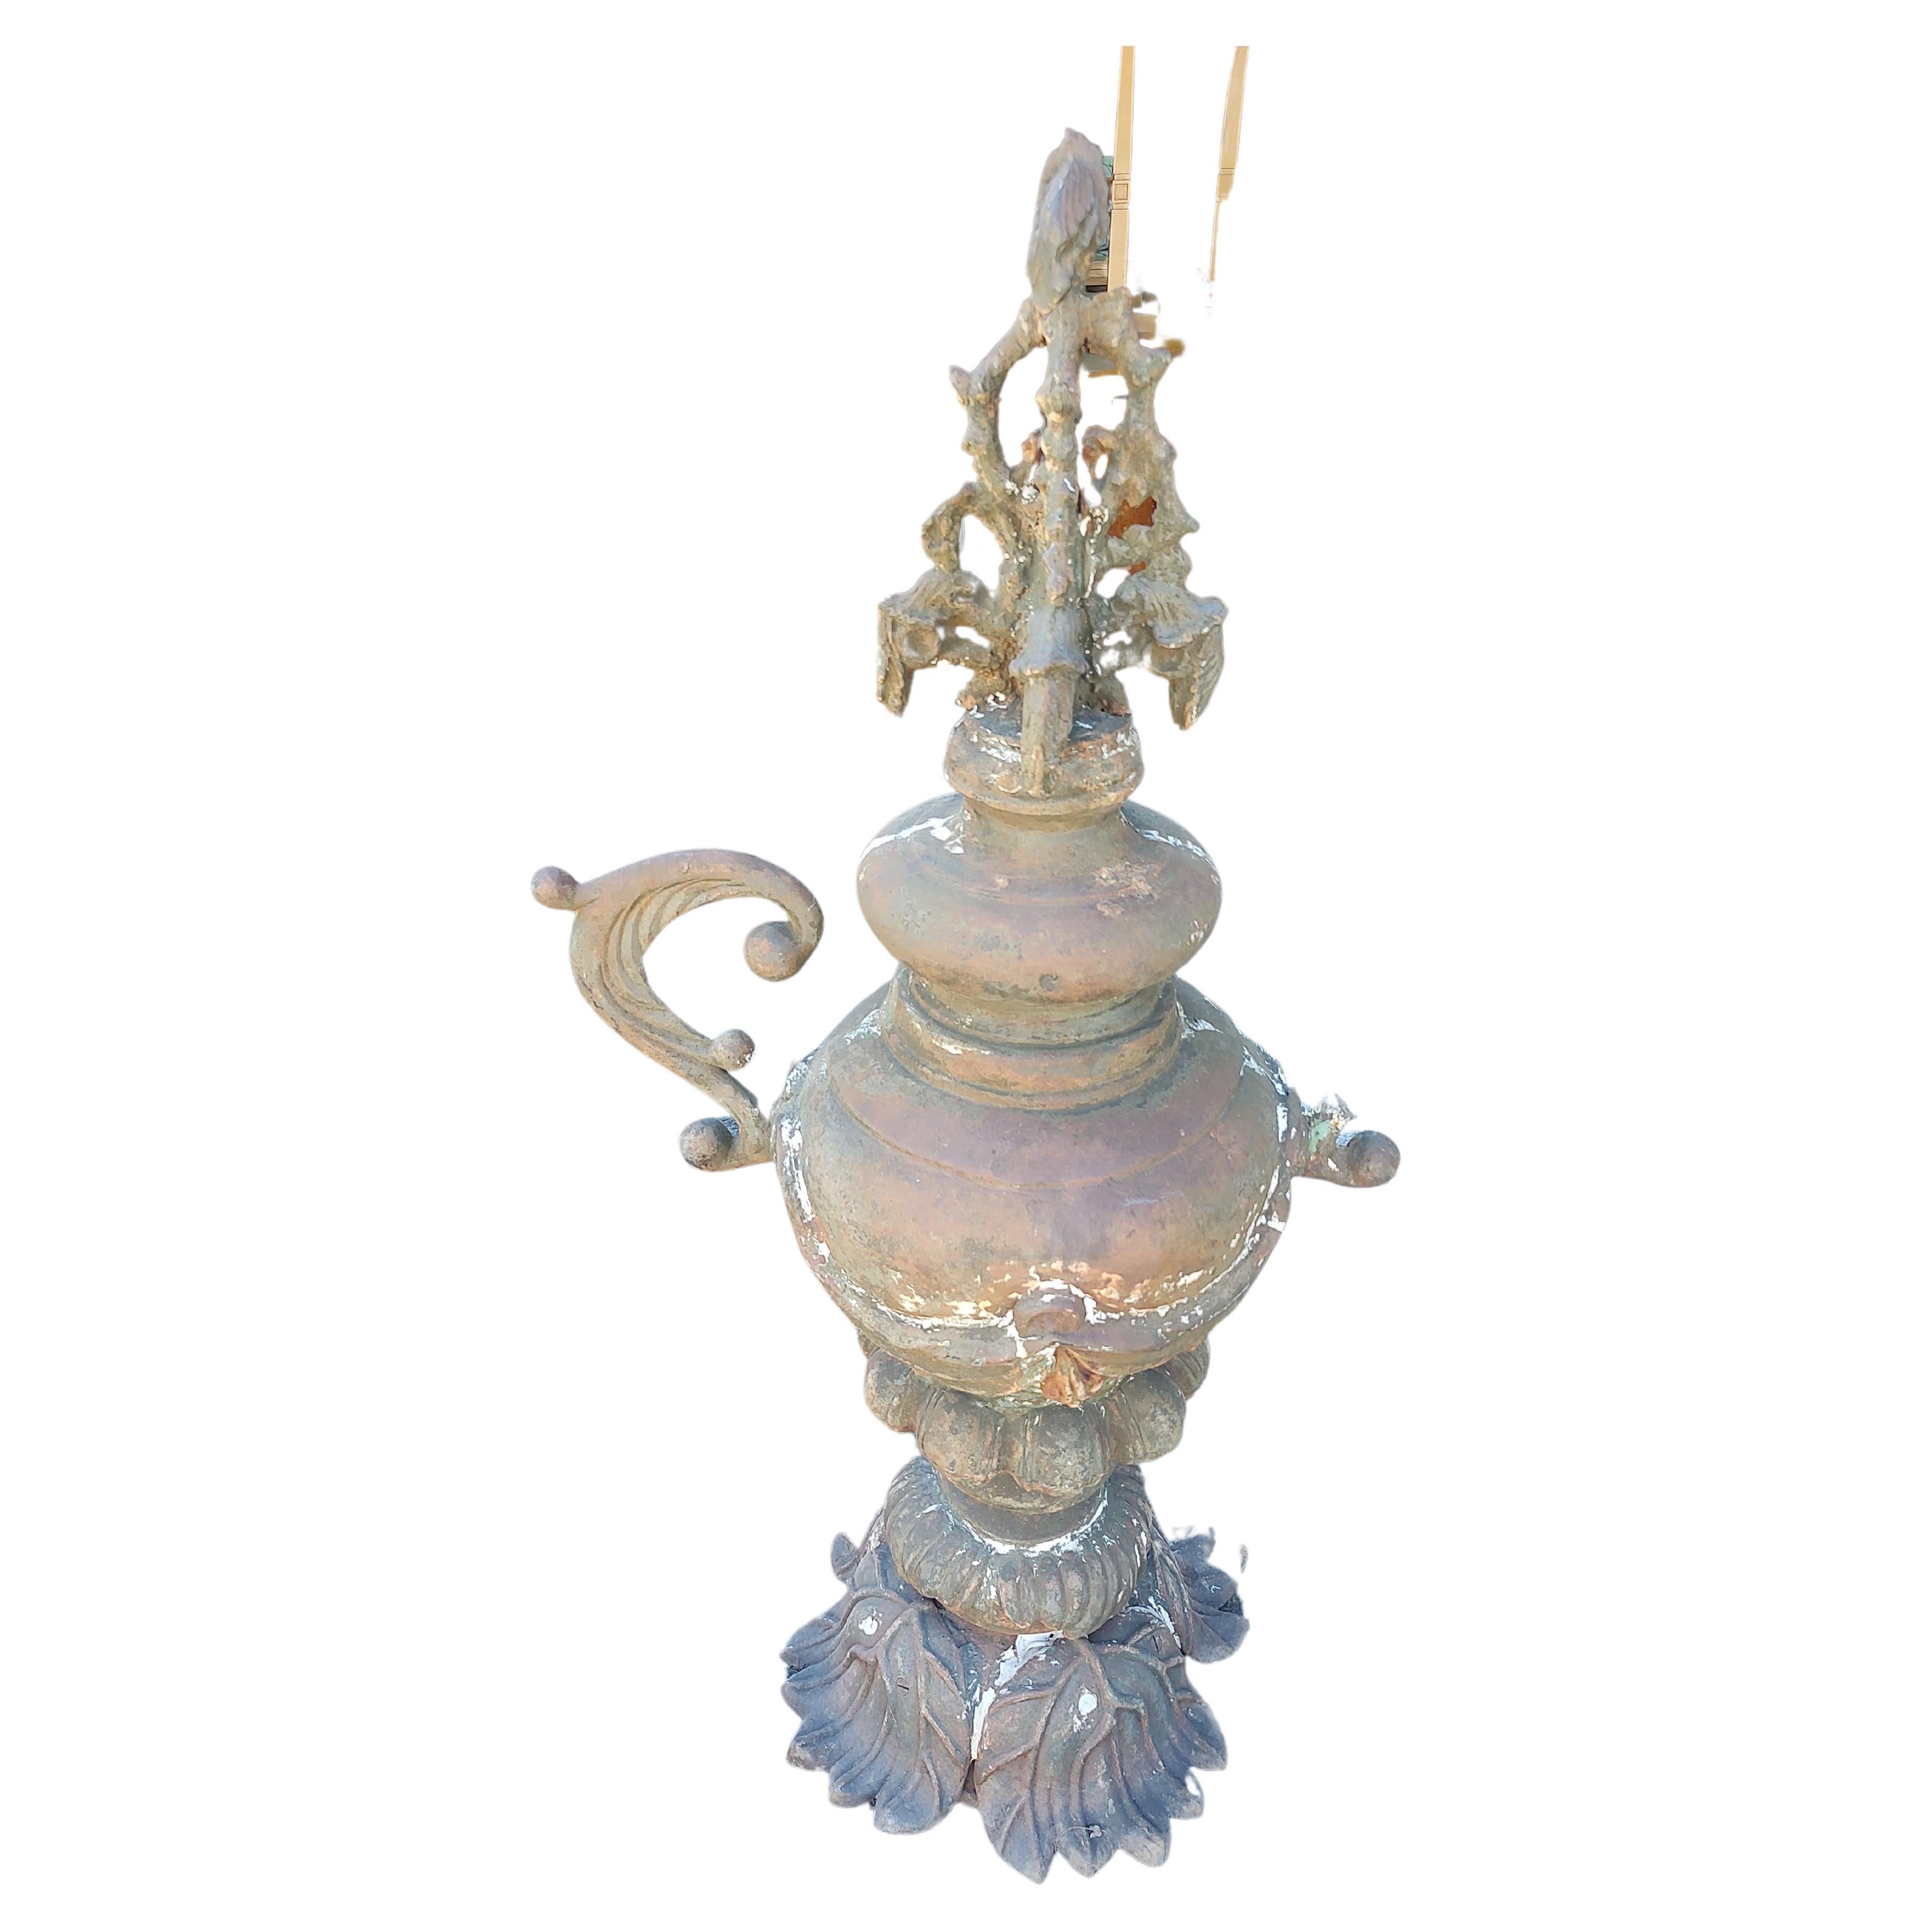 Large Cast Iron Finial Urn with Handle C1875